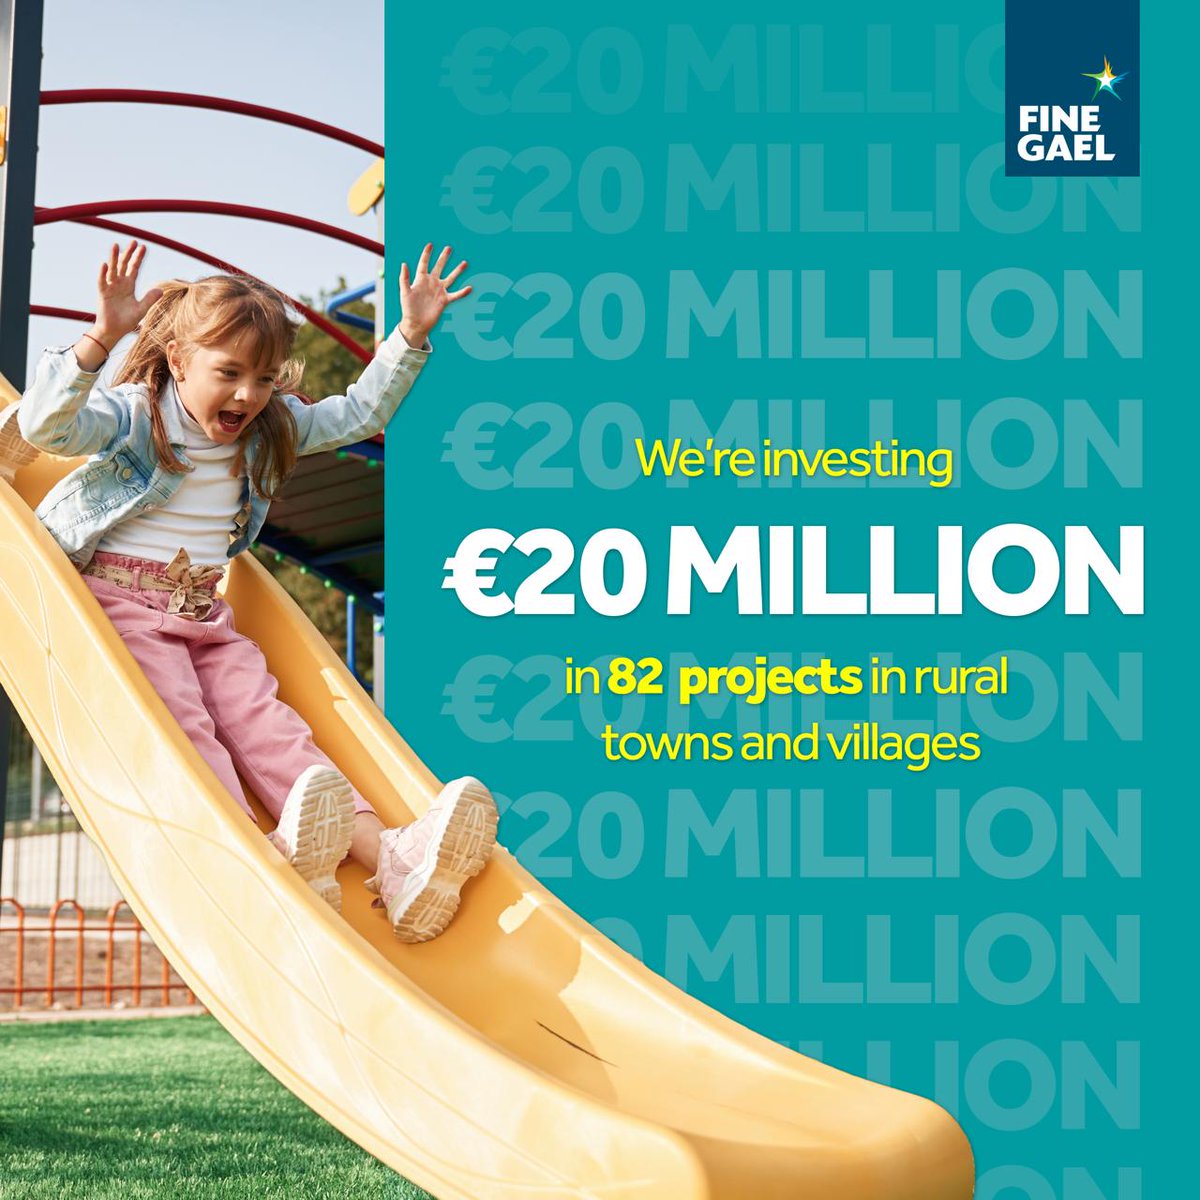 Fine Gael is building strong communities with over €20 million in funding for 82 regeneration projects in rural towns and villages right across the country. These projects include the regeneration of derelict buildings and creating public plazas, farmers markets and town parks